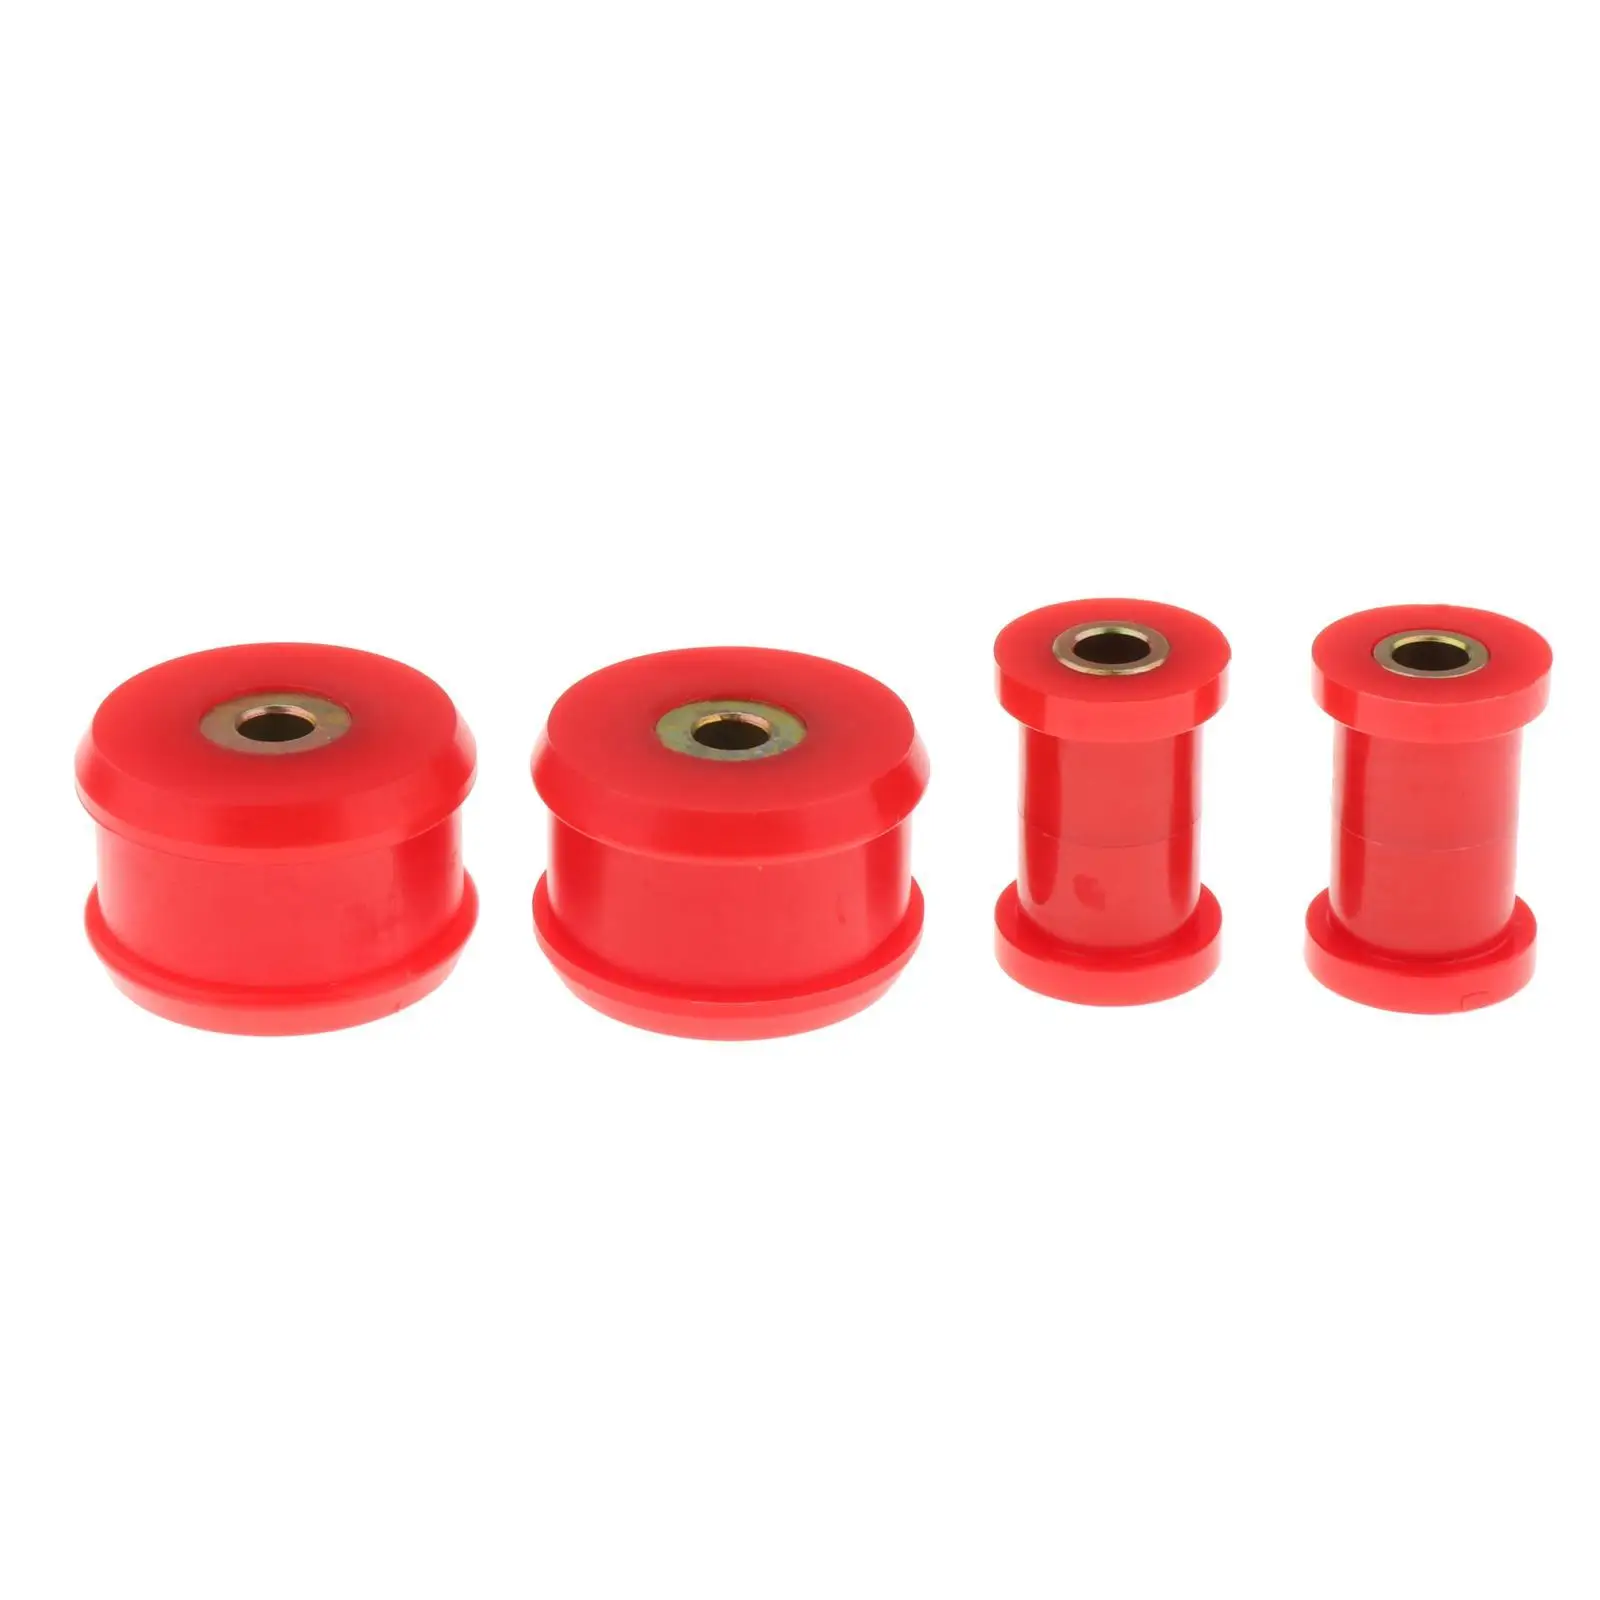   Arm Bushings Replacement fit for  MK2 MK4 1985-2006